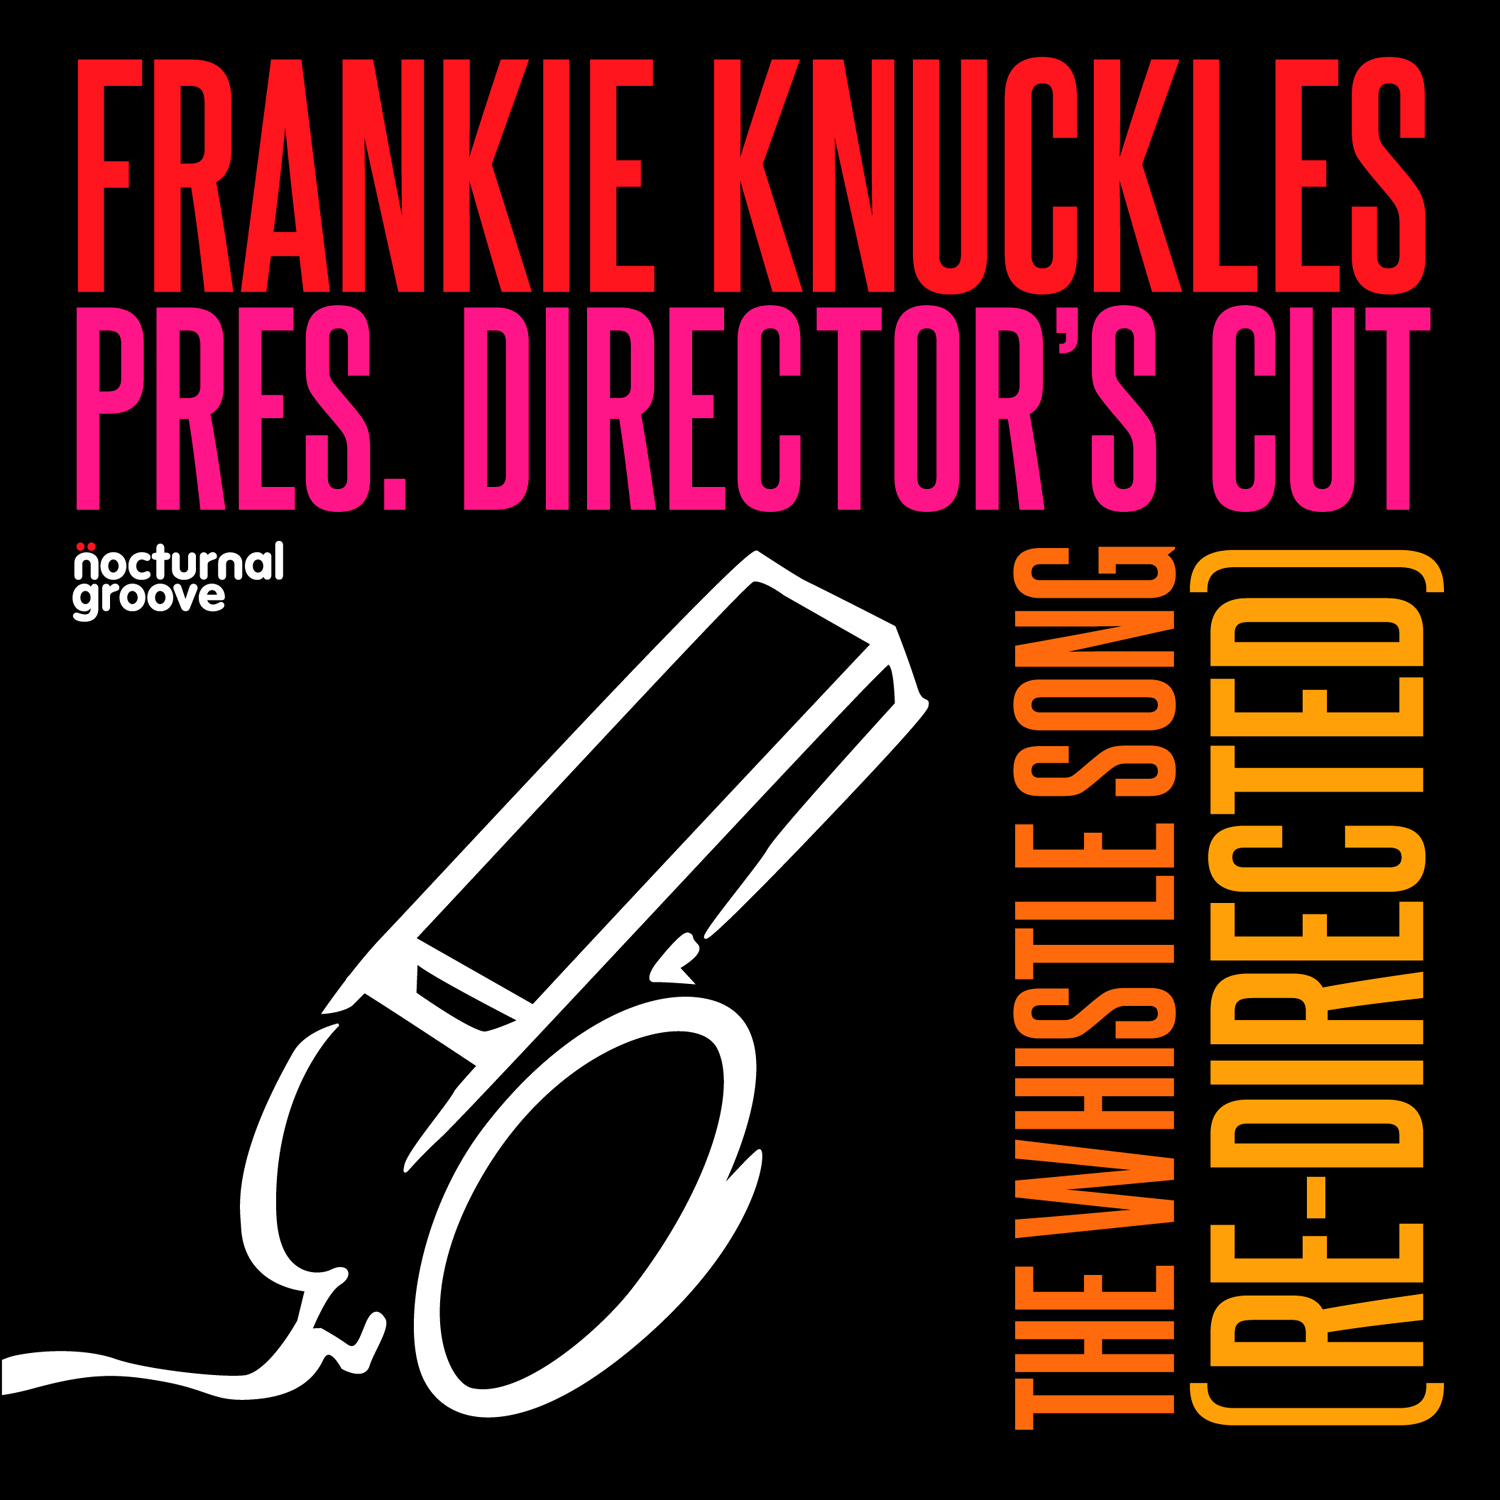 Frankie Knuckles pres. Director's Cut - The Whistle Song